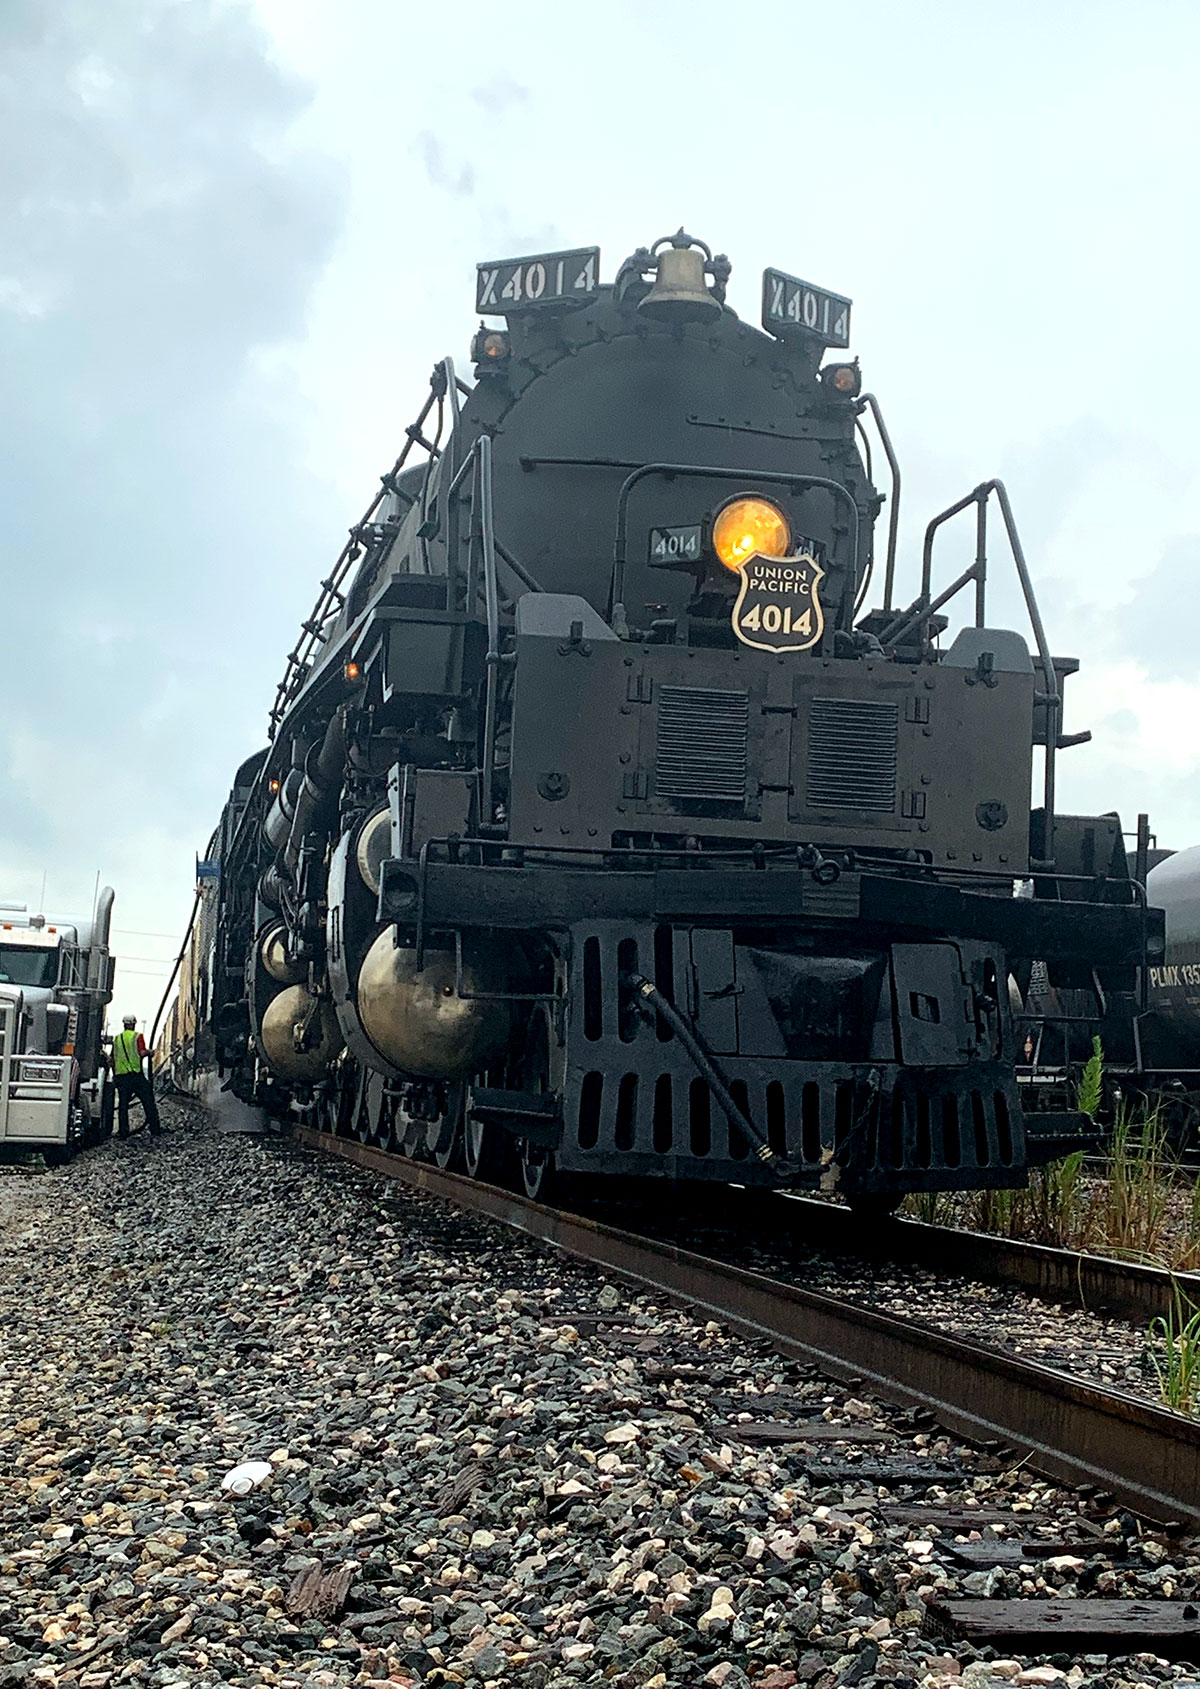 Union Pacific's Big Boy No. 4014 visited Beaumont, Aug. 18. Photo by Andy Coughlan